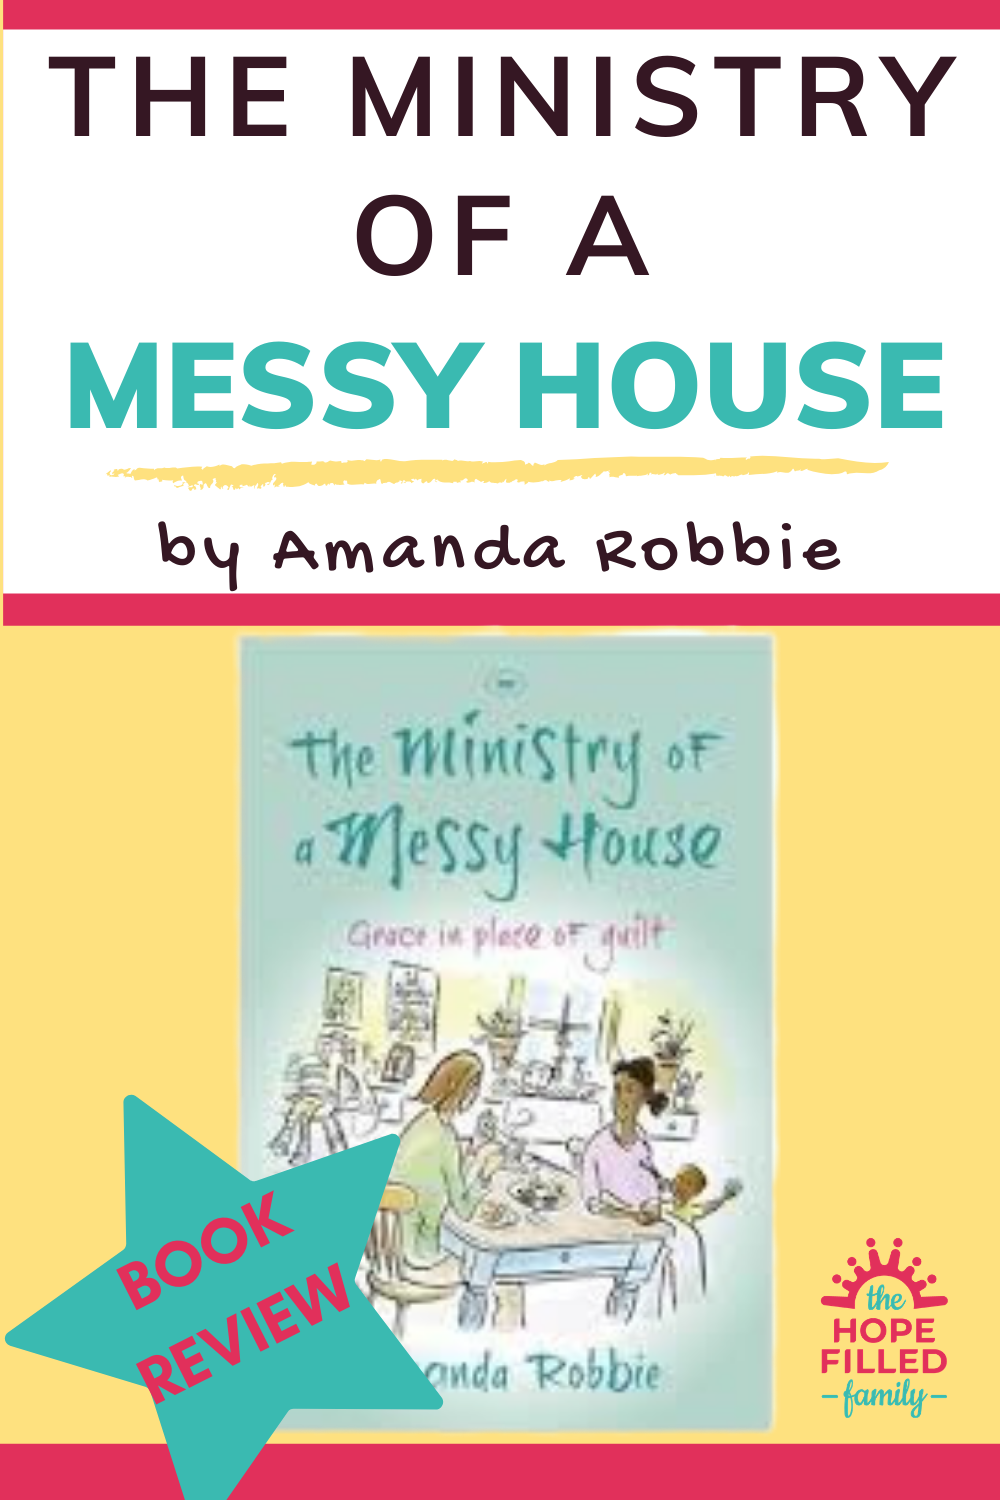 The Ministry of a Messy House by Amanda Robbie. How do hospitality and mess go hand in hand? How can I be hospitable with a messy family?